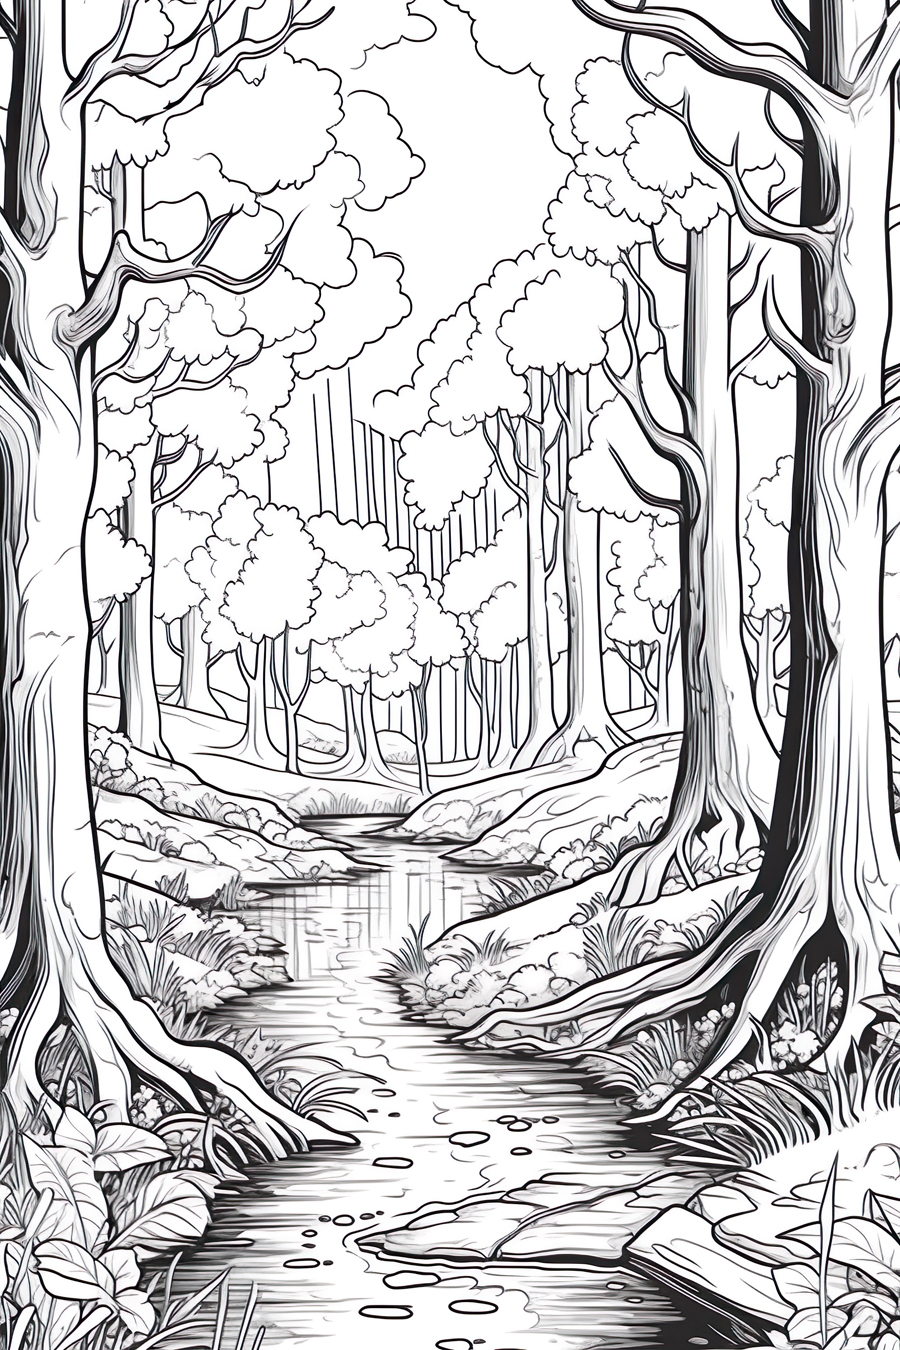 A black and white drawing of a stream in the forest.